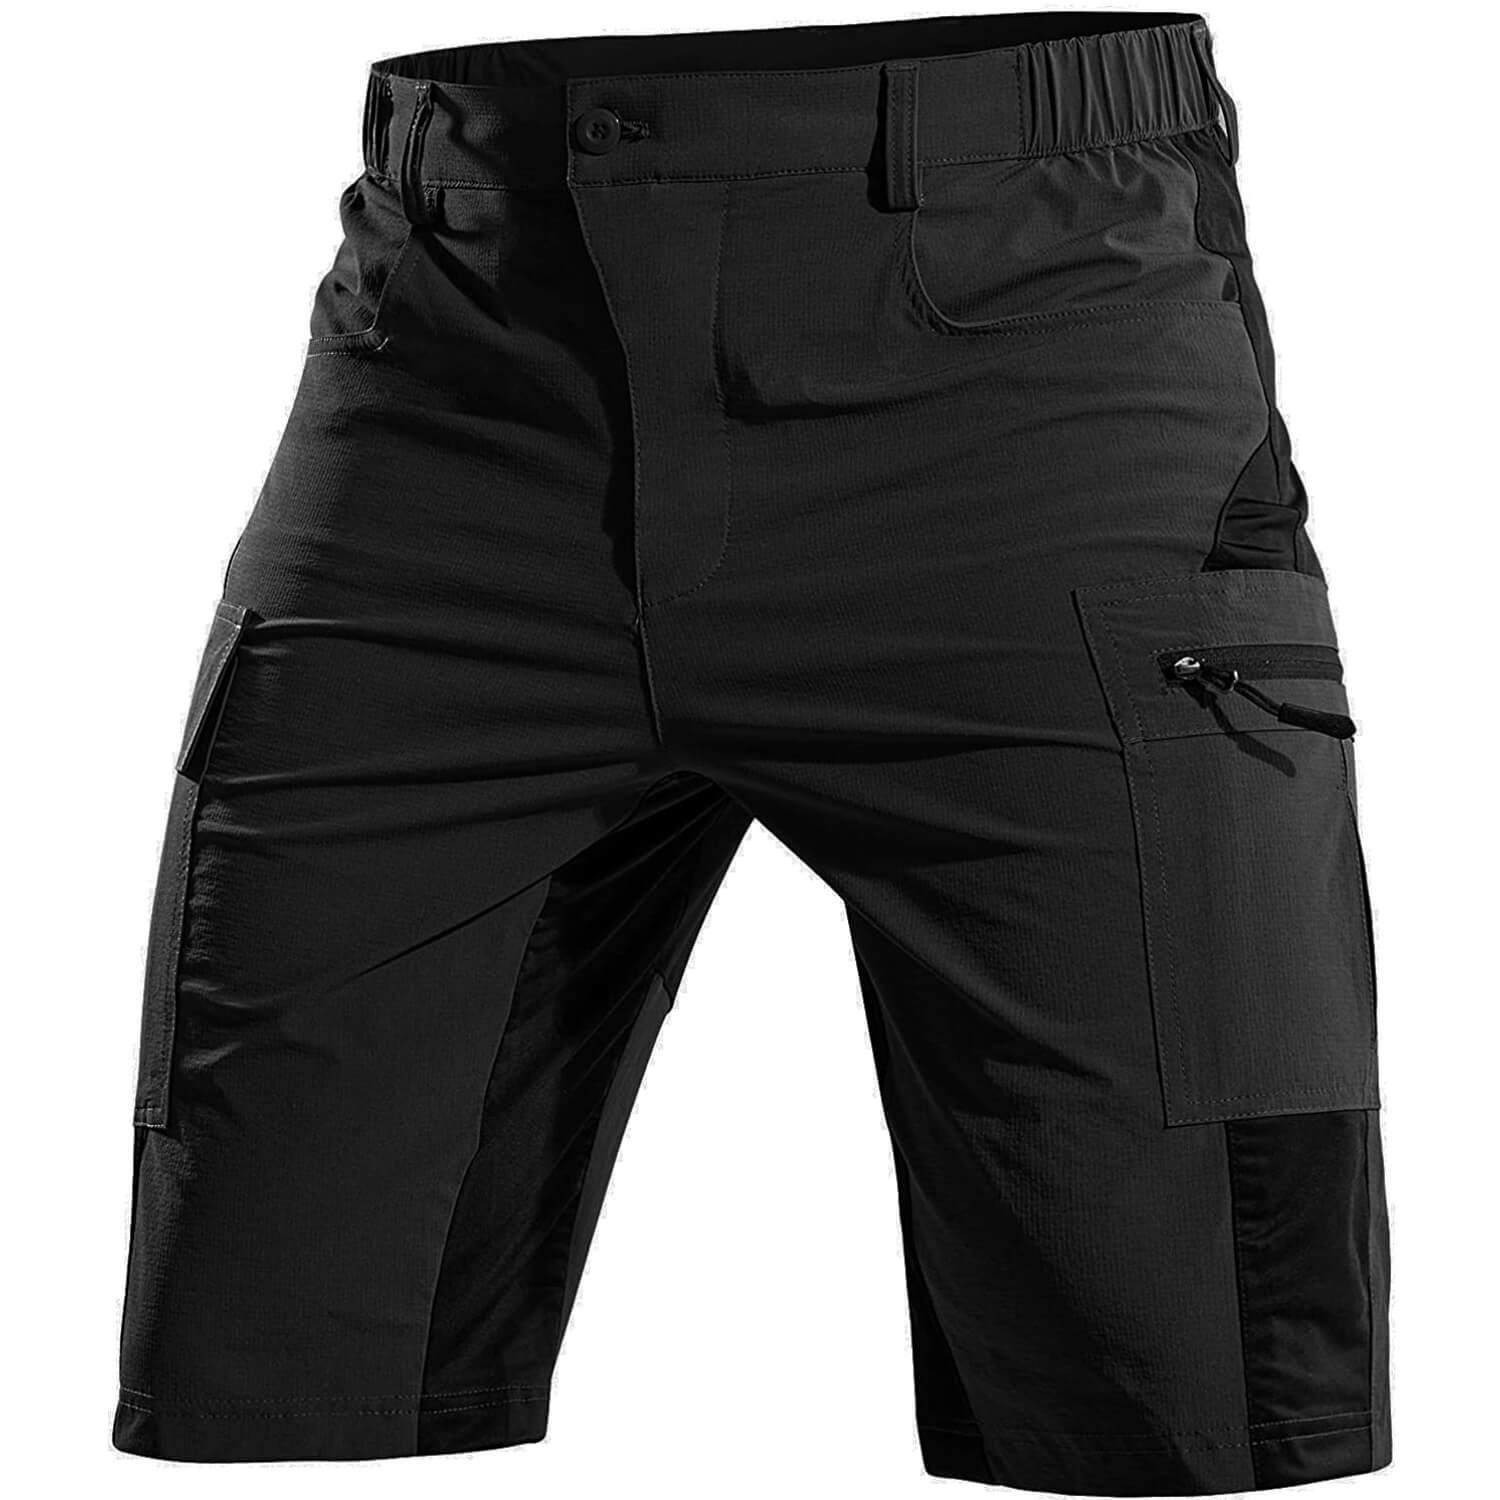 Men's Breathable MTB Shorts - Multi-Pocket, Comfortable, Durable for Outdoor Cycling